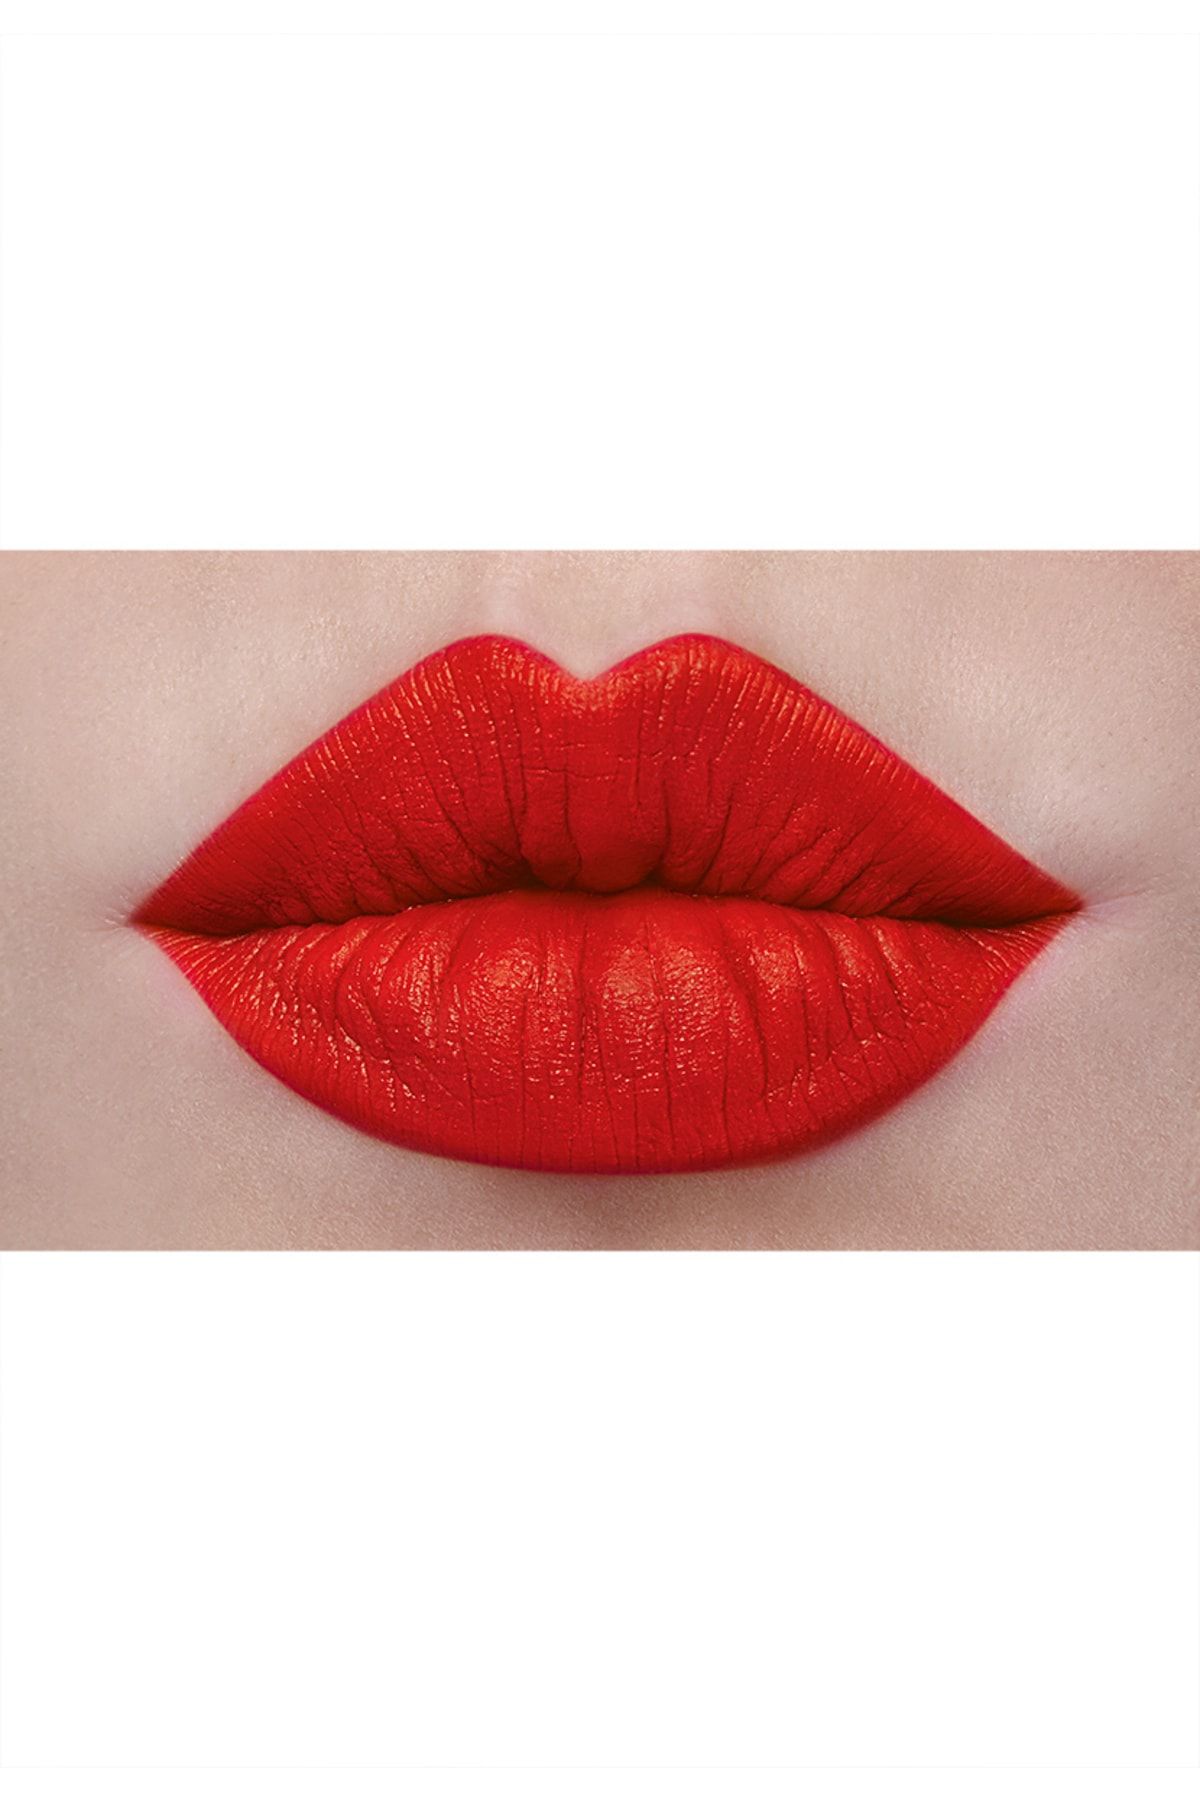 Faberlic Hd Color Lipstick, Shade "red Effect" - 4.0 Gr.